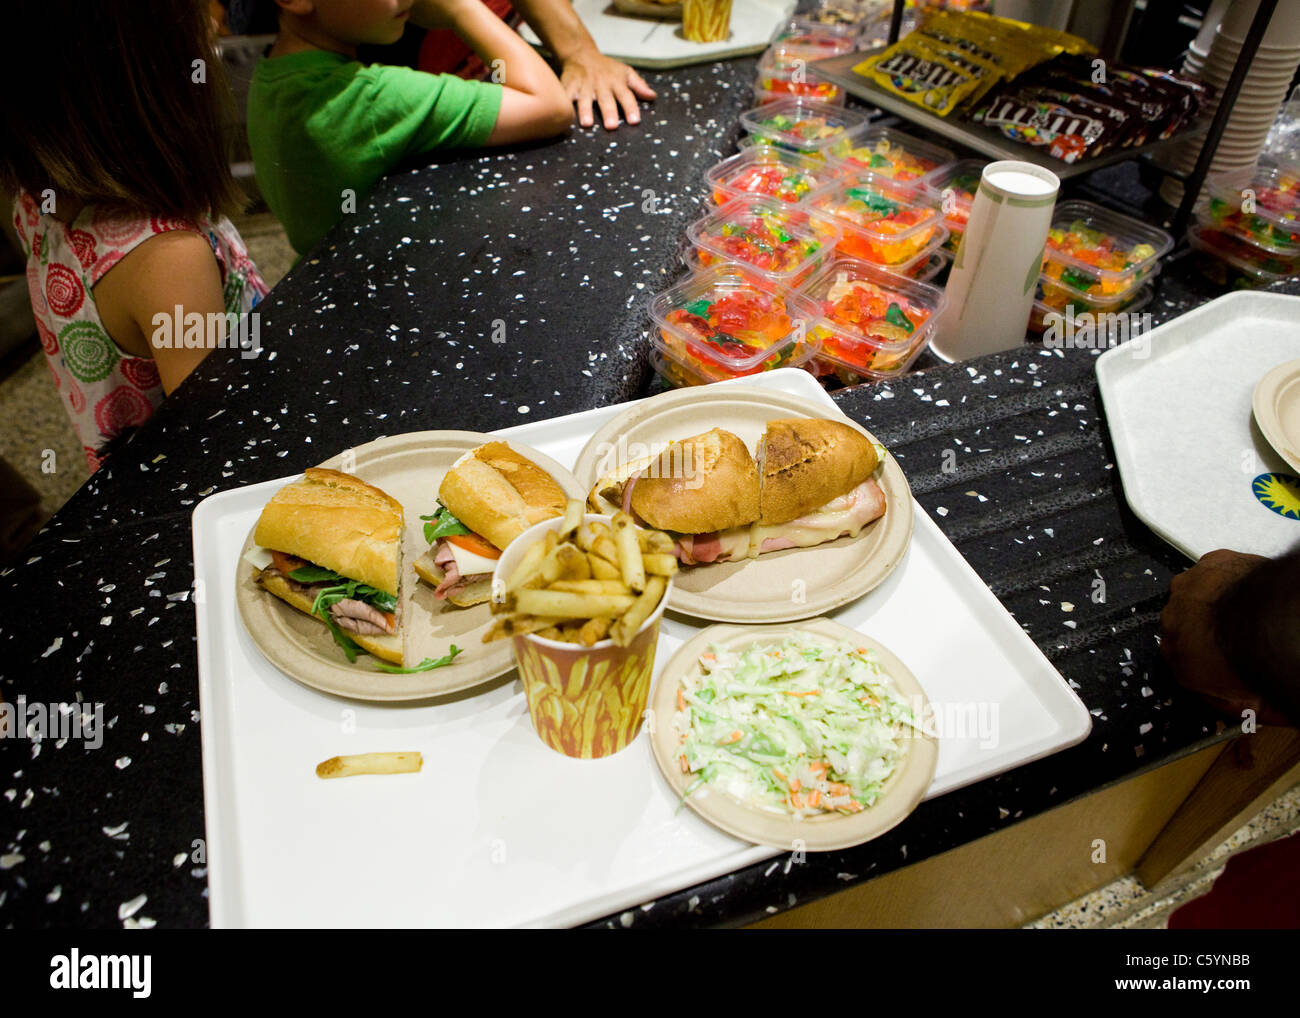 Sandwiches, French fries and coleslaw on cafeteria tray, waiting in checkout queue Stock Photo